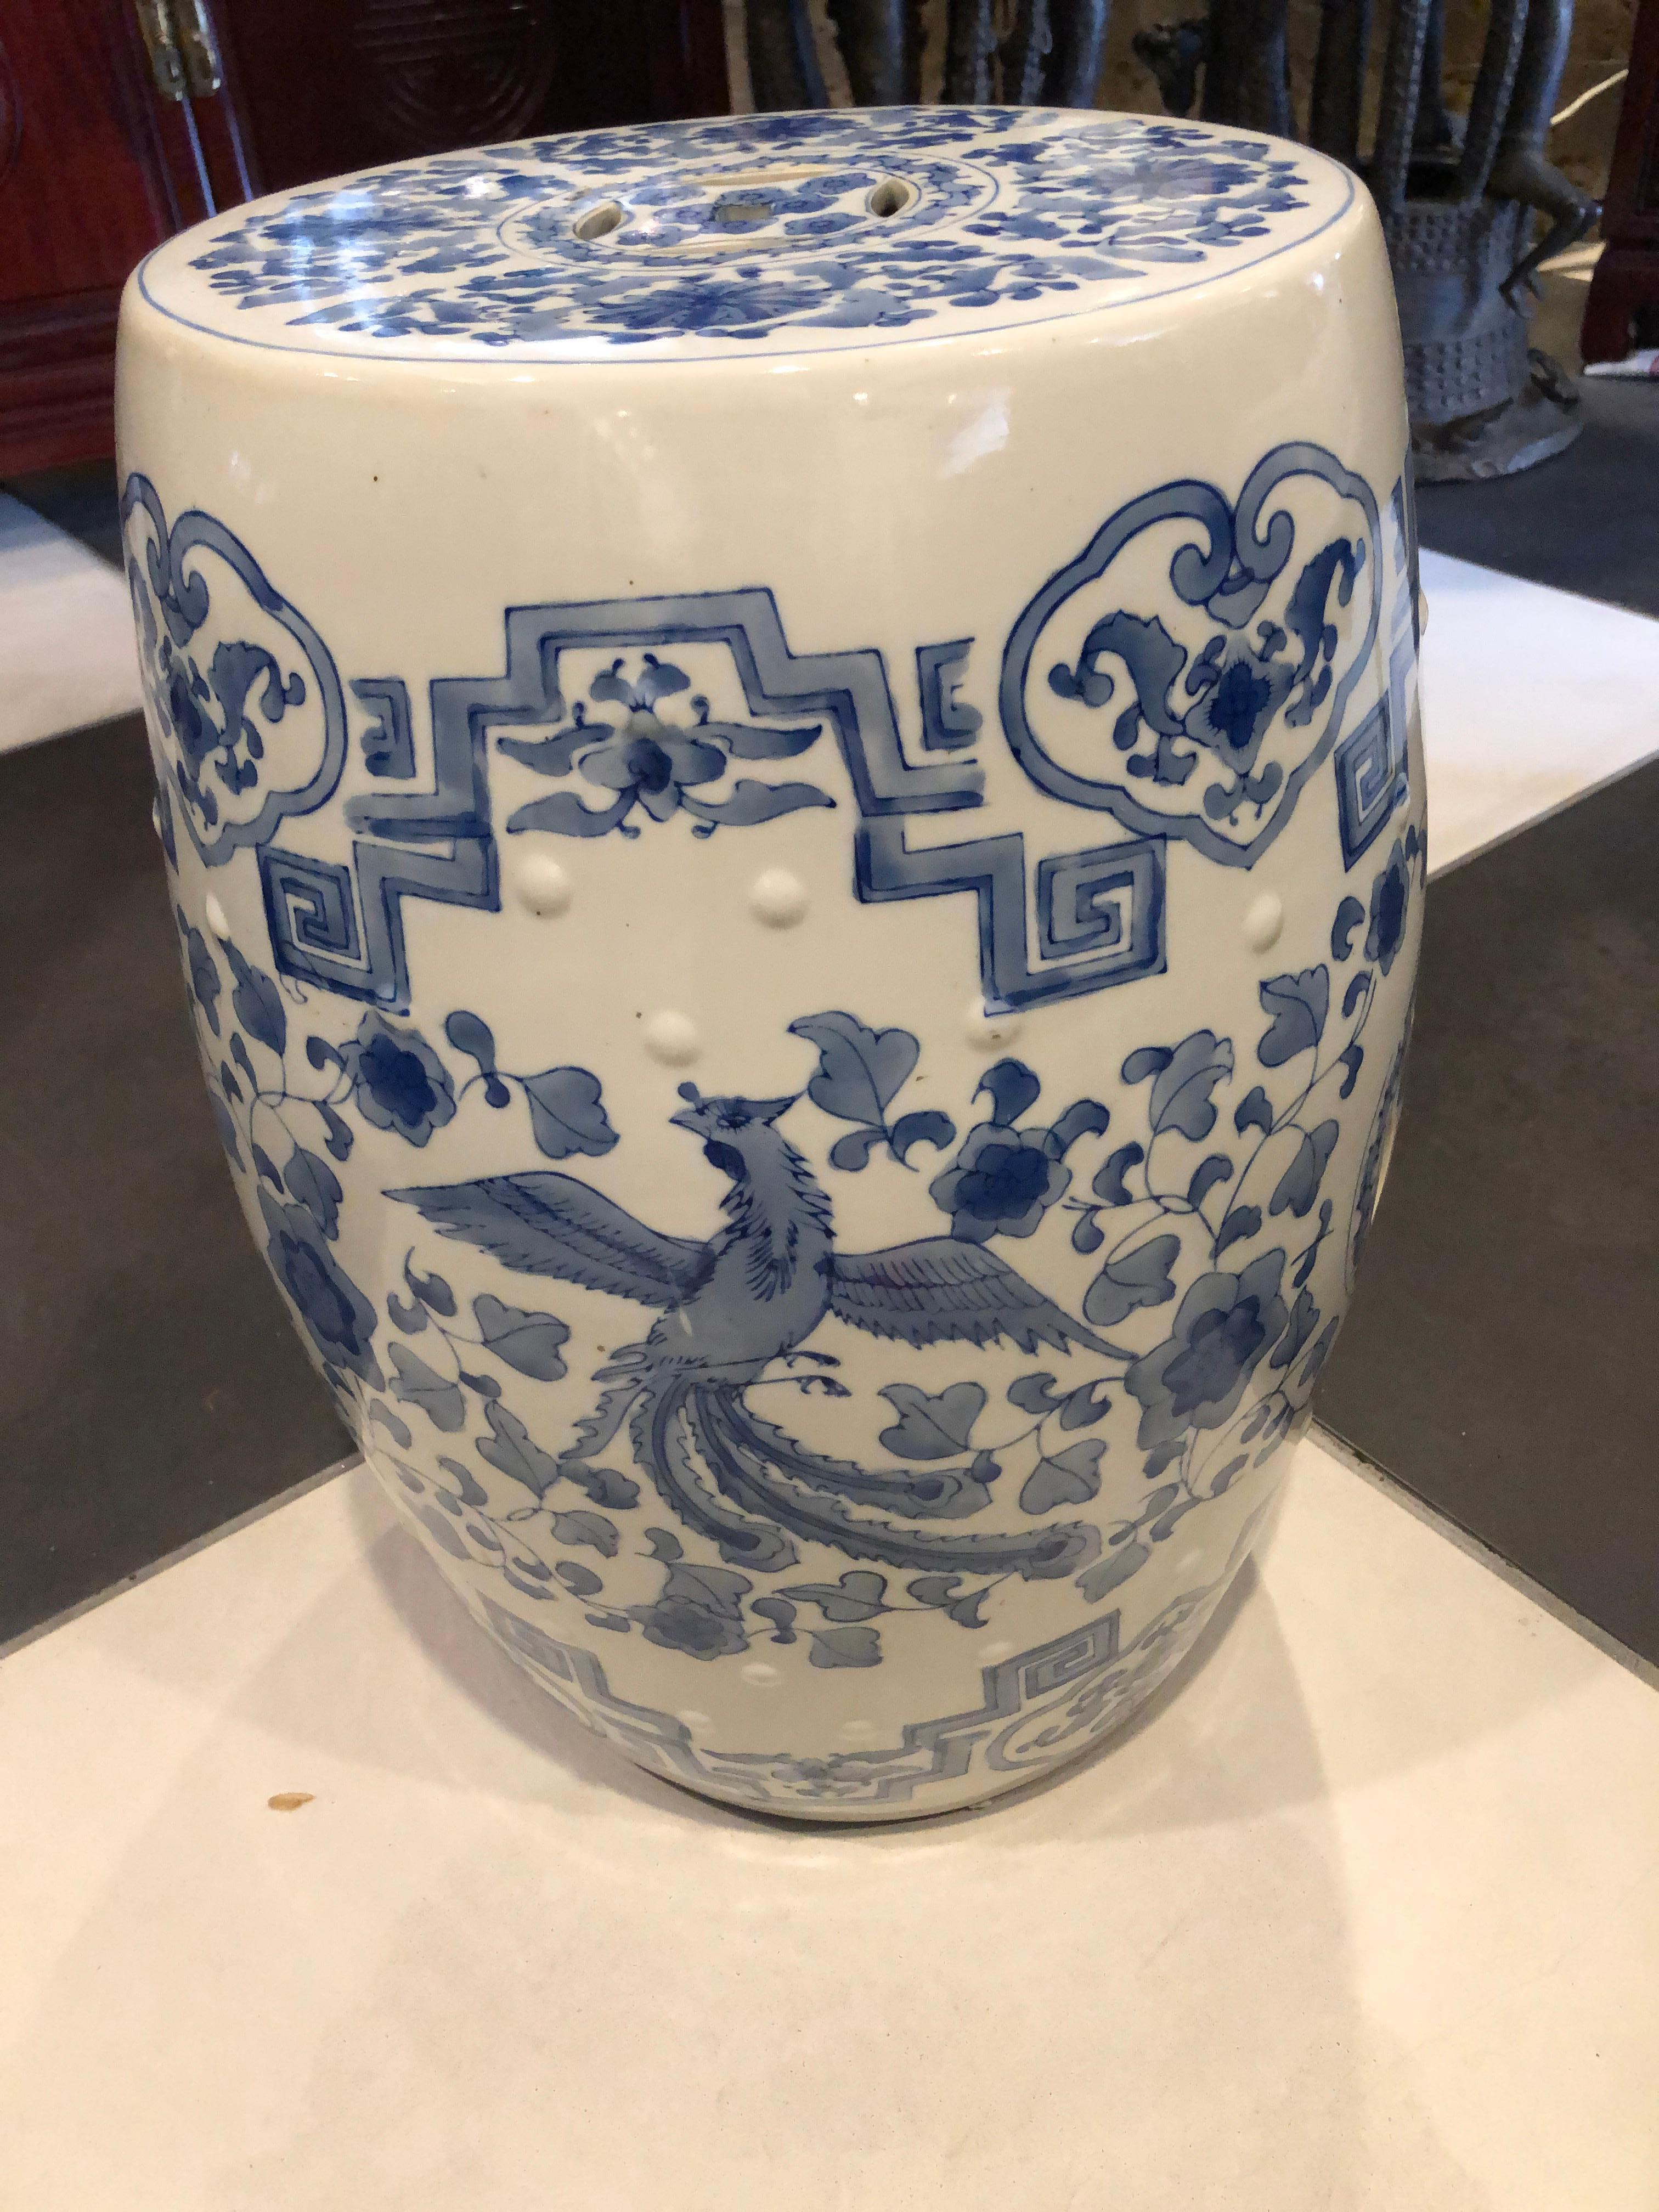 This Chinese garden stool/side table is hand painted in blue and white in the Dragon and Phoenix Design. Pierced top and side completes the look in the old style.